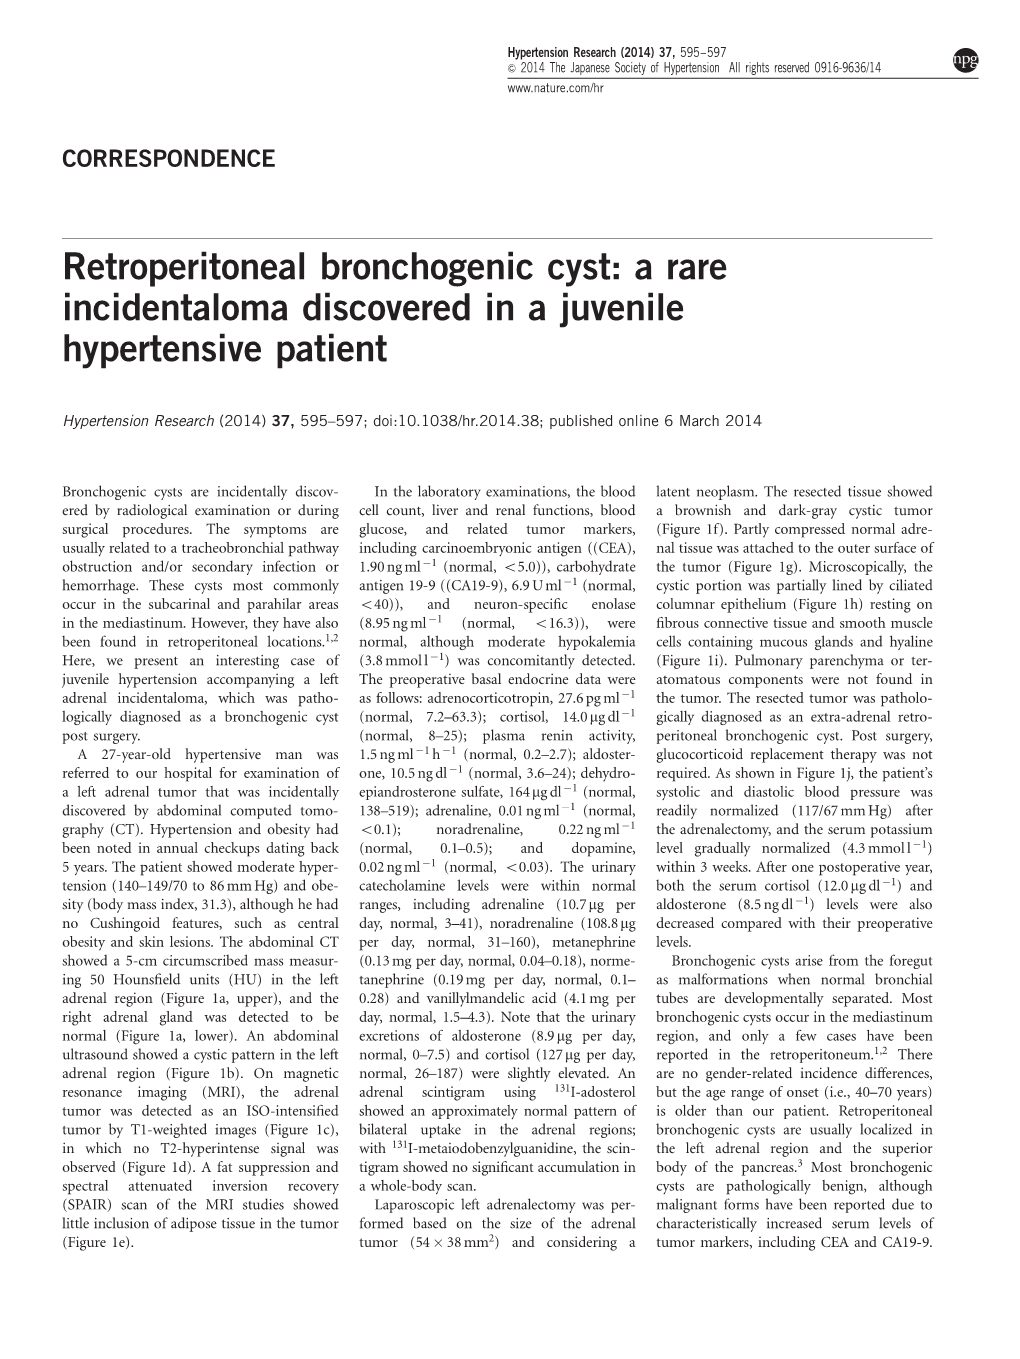 Retroperitoneal Bronchogenic Cyst: a Rare Incidentaloma Discovered in a Juvenile Hypertensive Patient